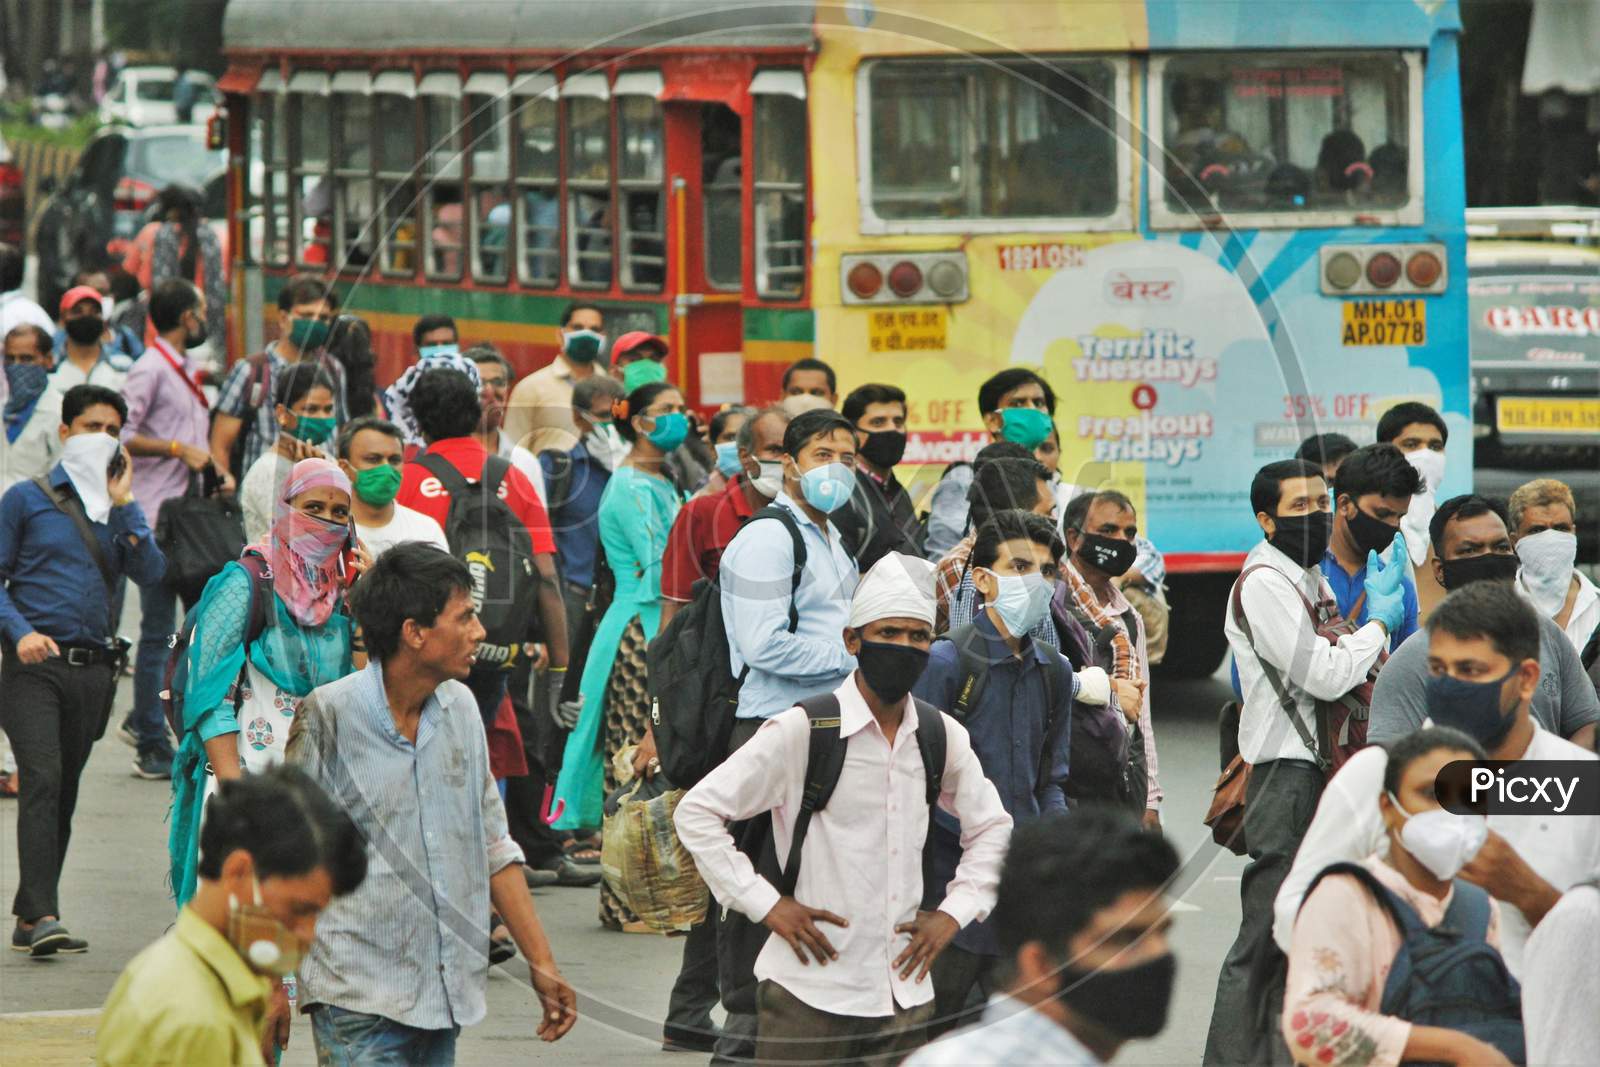 People wait to board a public bus, after the government eased a nationwide lockdown that was imposed as a preventive measure against the COVID-19 coronavirus, in Mumbai, India, on June 26, 2020.